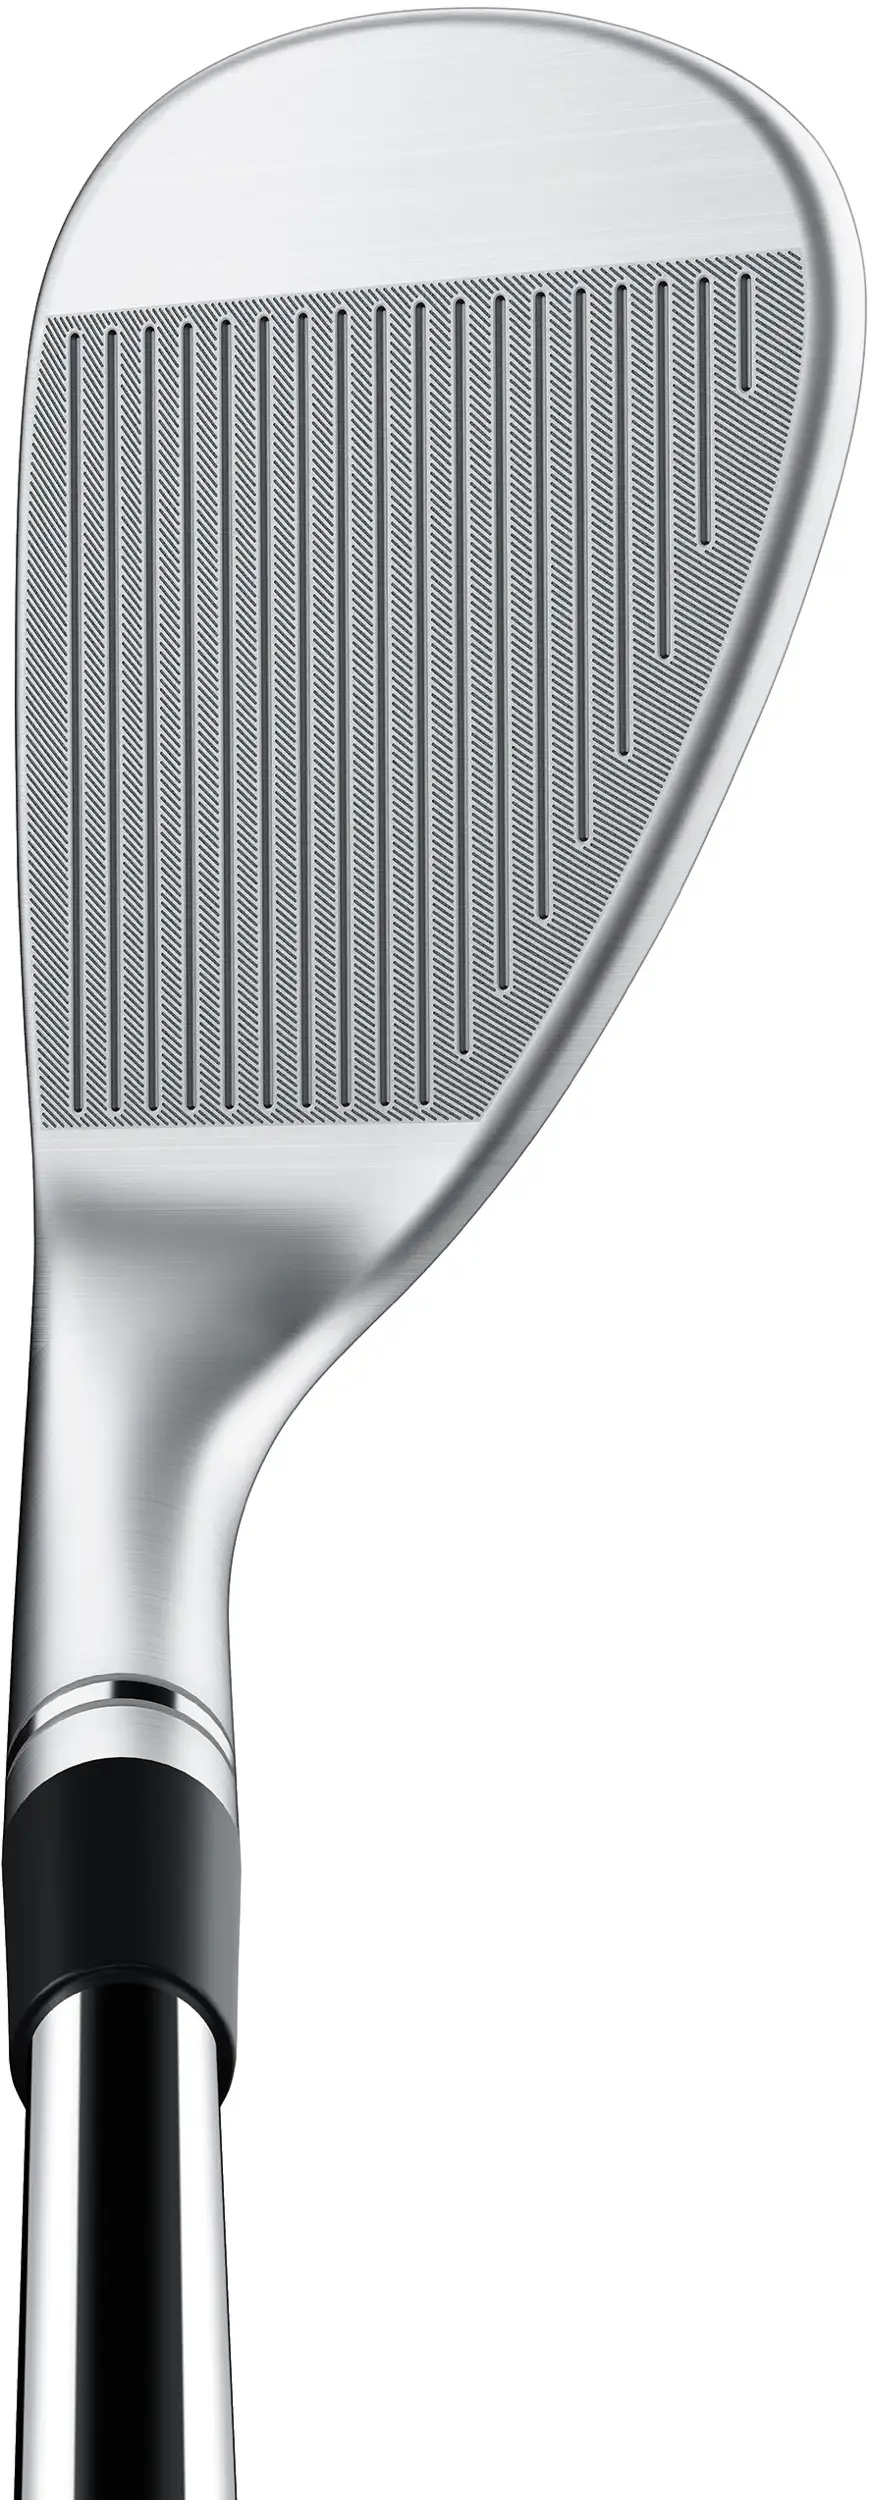 TaylorMade Milled Grind 4 Tiger Woods Chrome Wedge